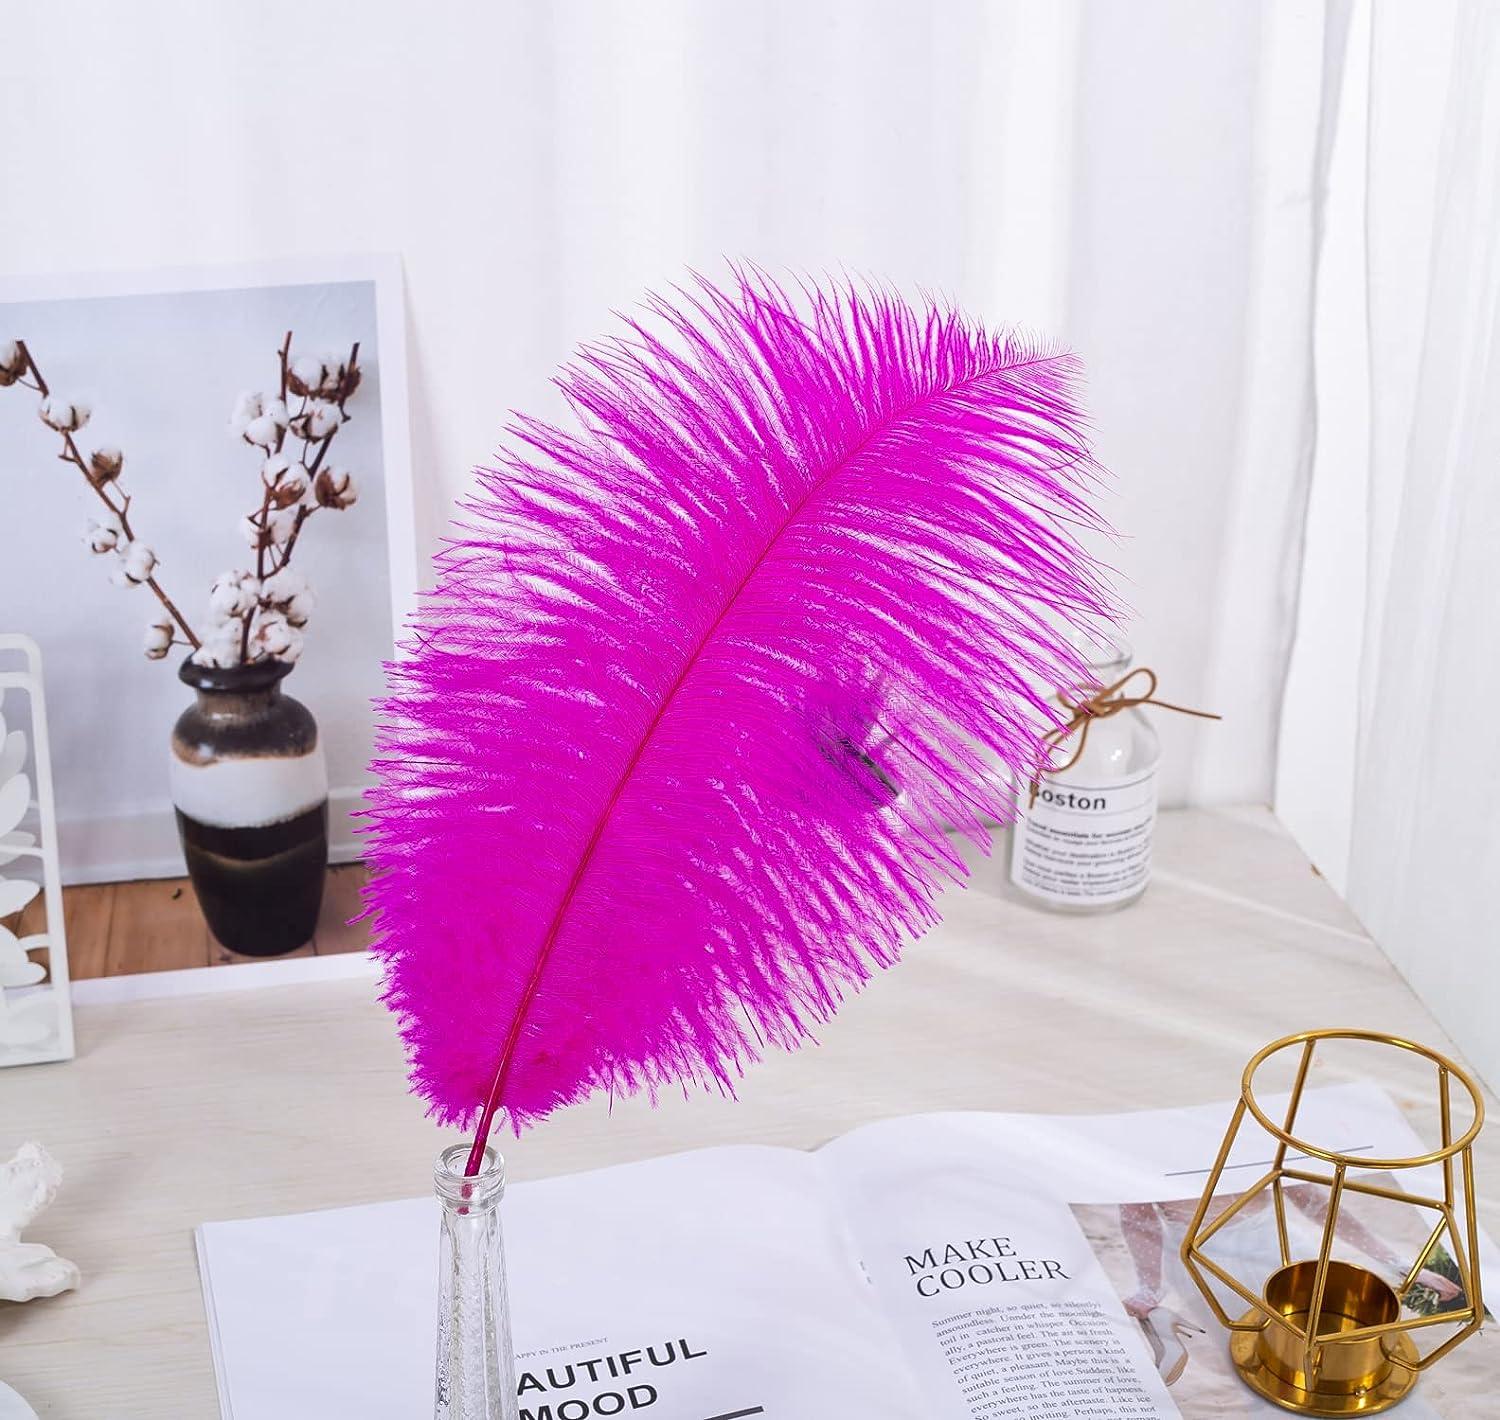 Fuchsia Ostrich Feathers - Feather Centerpieces | Wedding Centerpieces |  Feather Decorations | Feathers For Vases